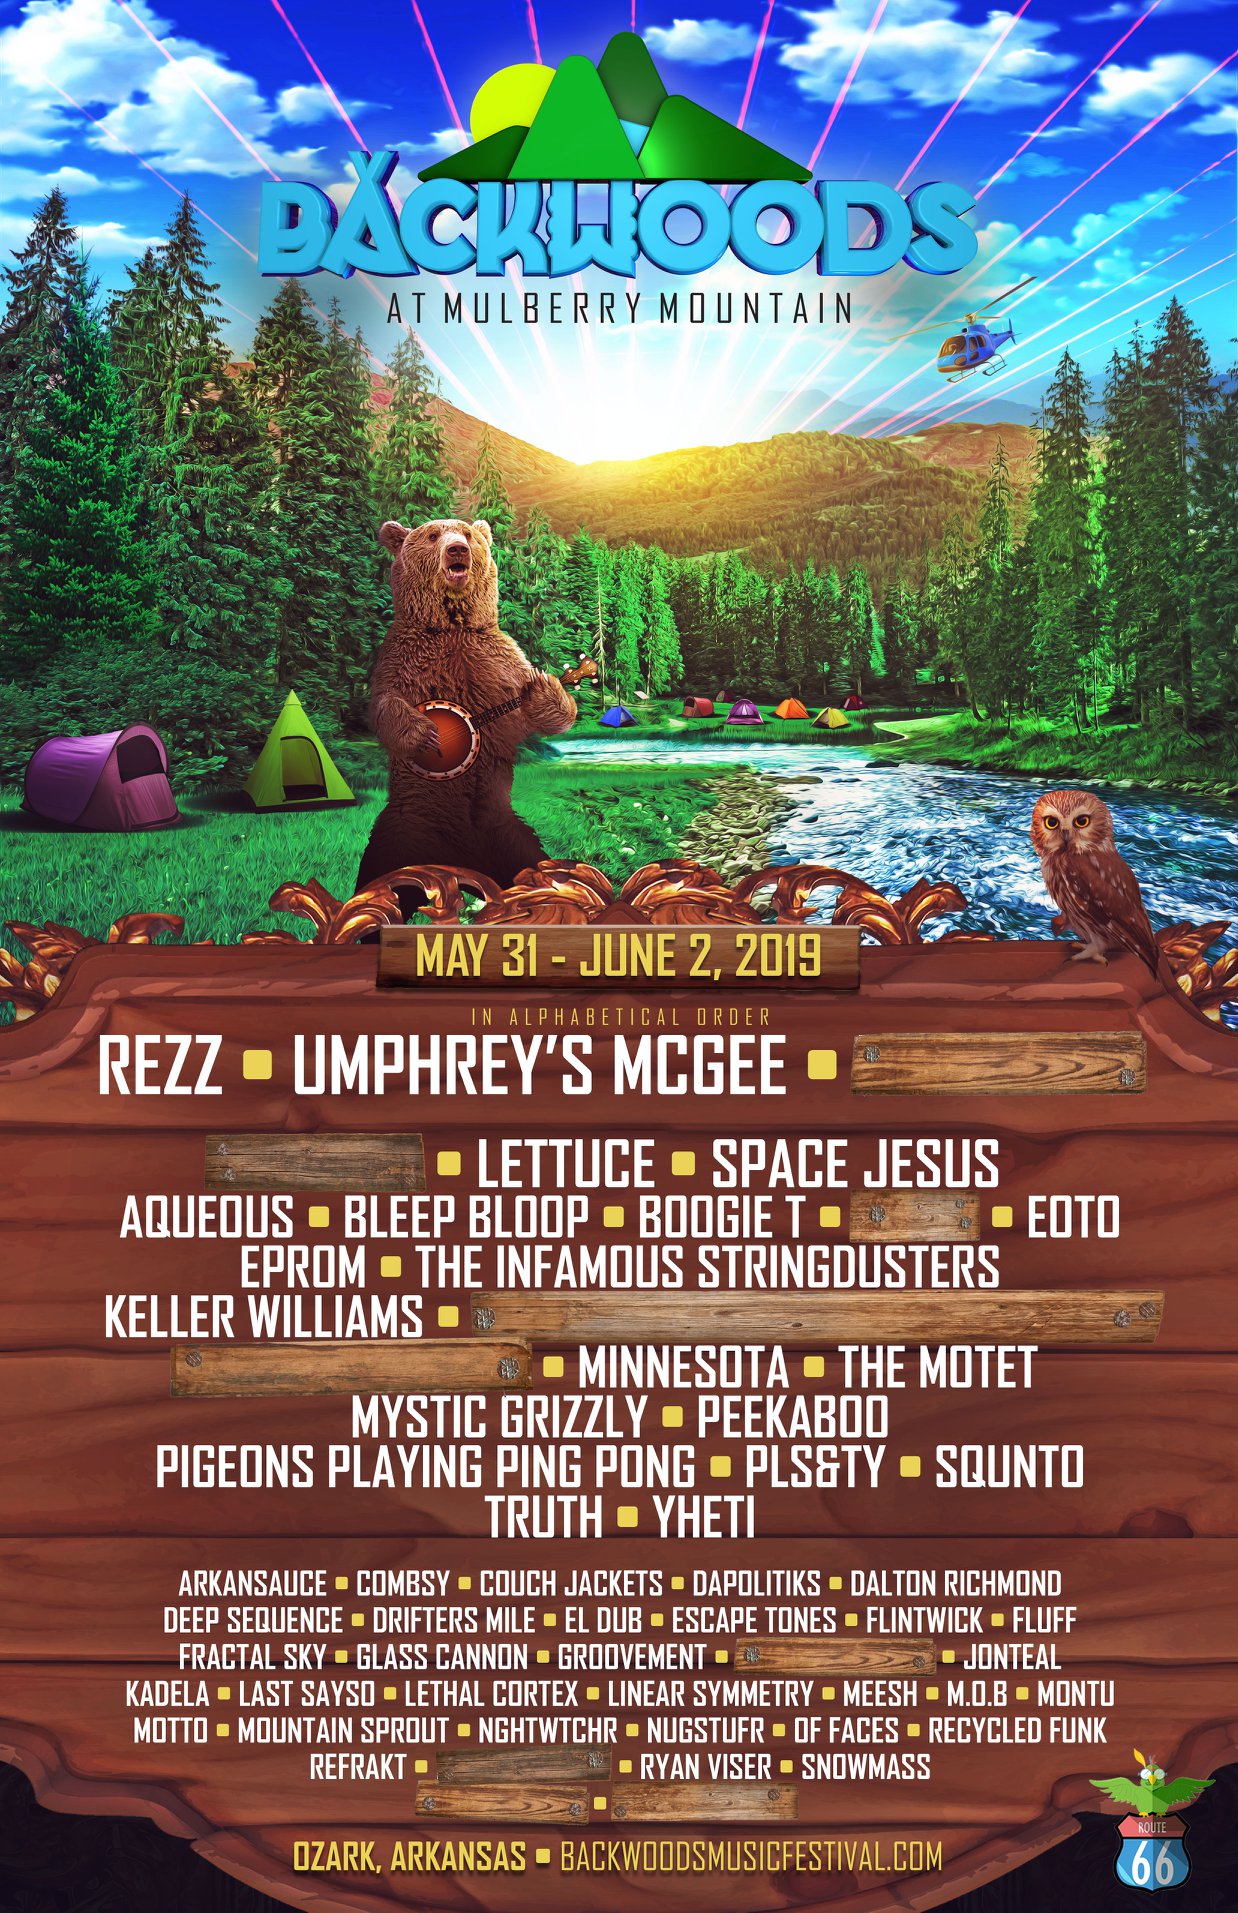 Backwoods at Mulberry Mountain shares first look at 2019 lineup